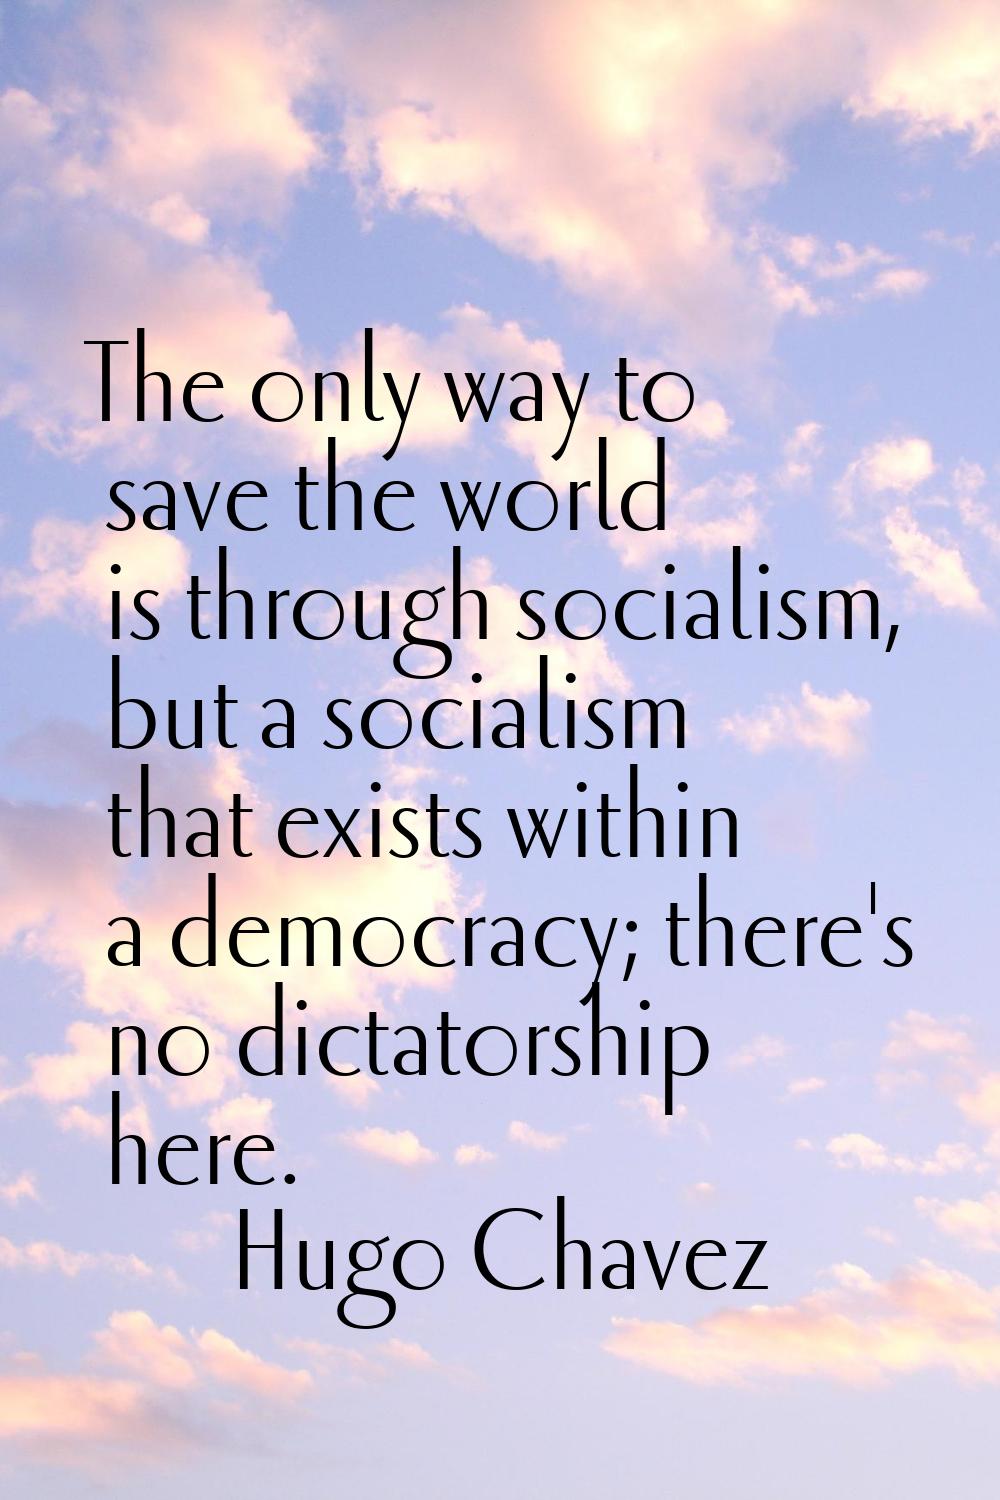 The only way to save the world is through socialism, but a socialism that exists within a democracy